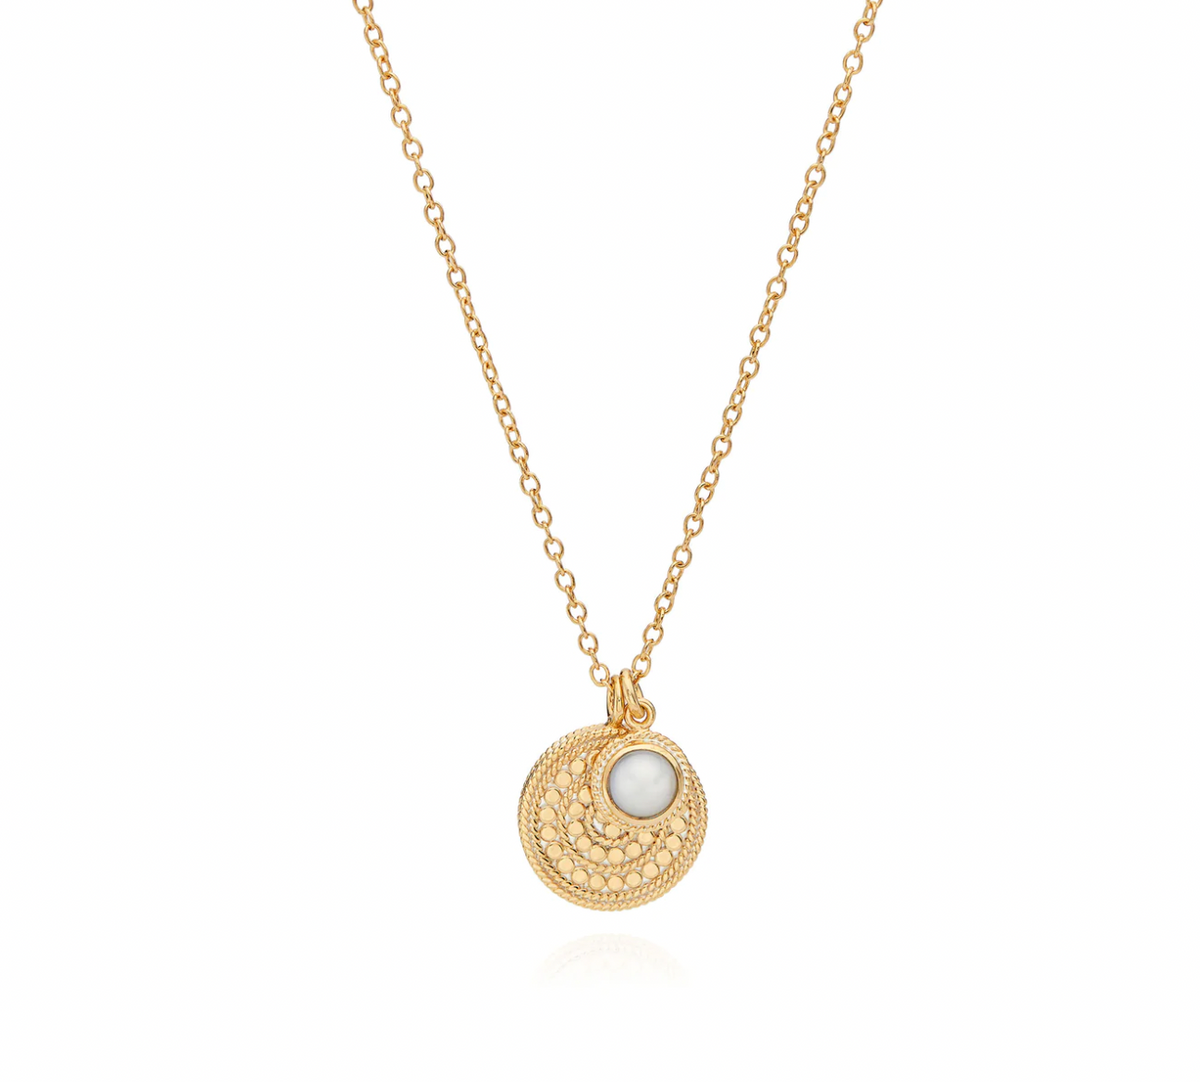 Gold plated sterling necklace with pearl and dot work charms